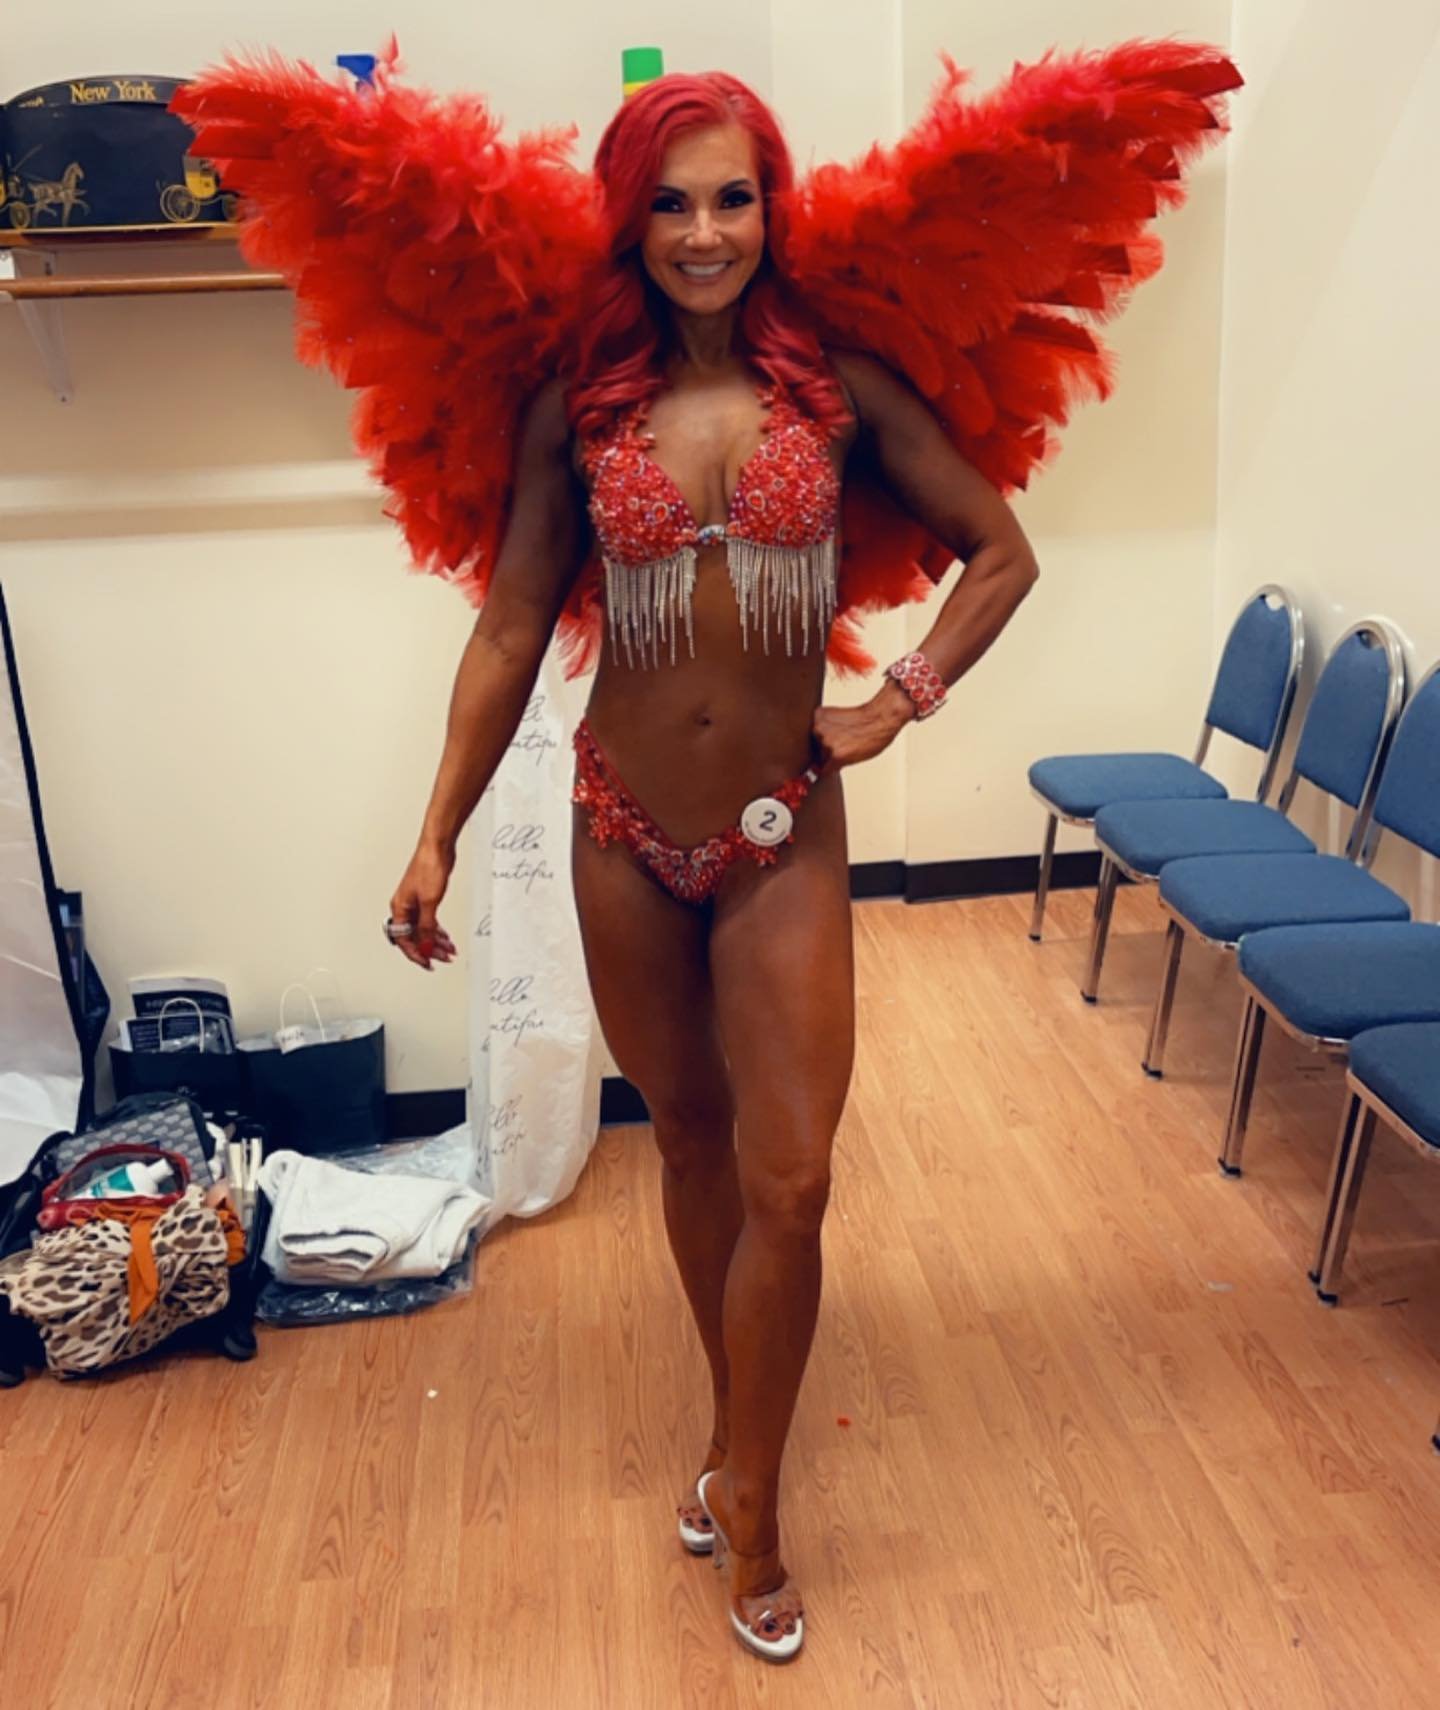 Red Angel❤️❤️❤️ 

@compete_ipl Fitness Angels division at the fabulous show by promoter @sam_rae_fit in Virginia last weekend! 

Message me if you want to don your wings and take to the IPL stage this October in CT!

This entire beautiful outfit from